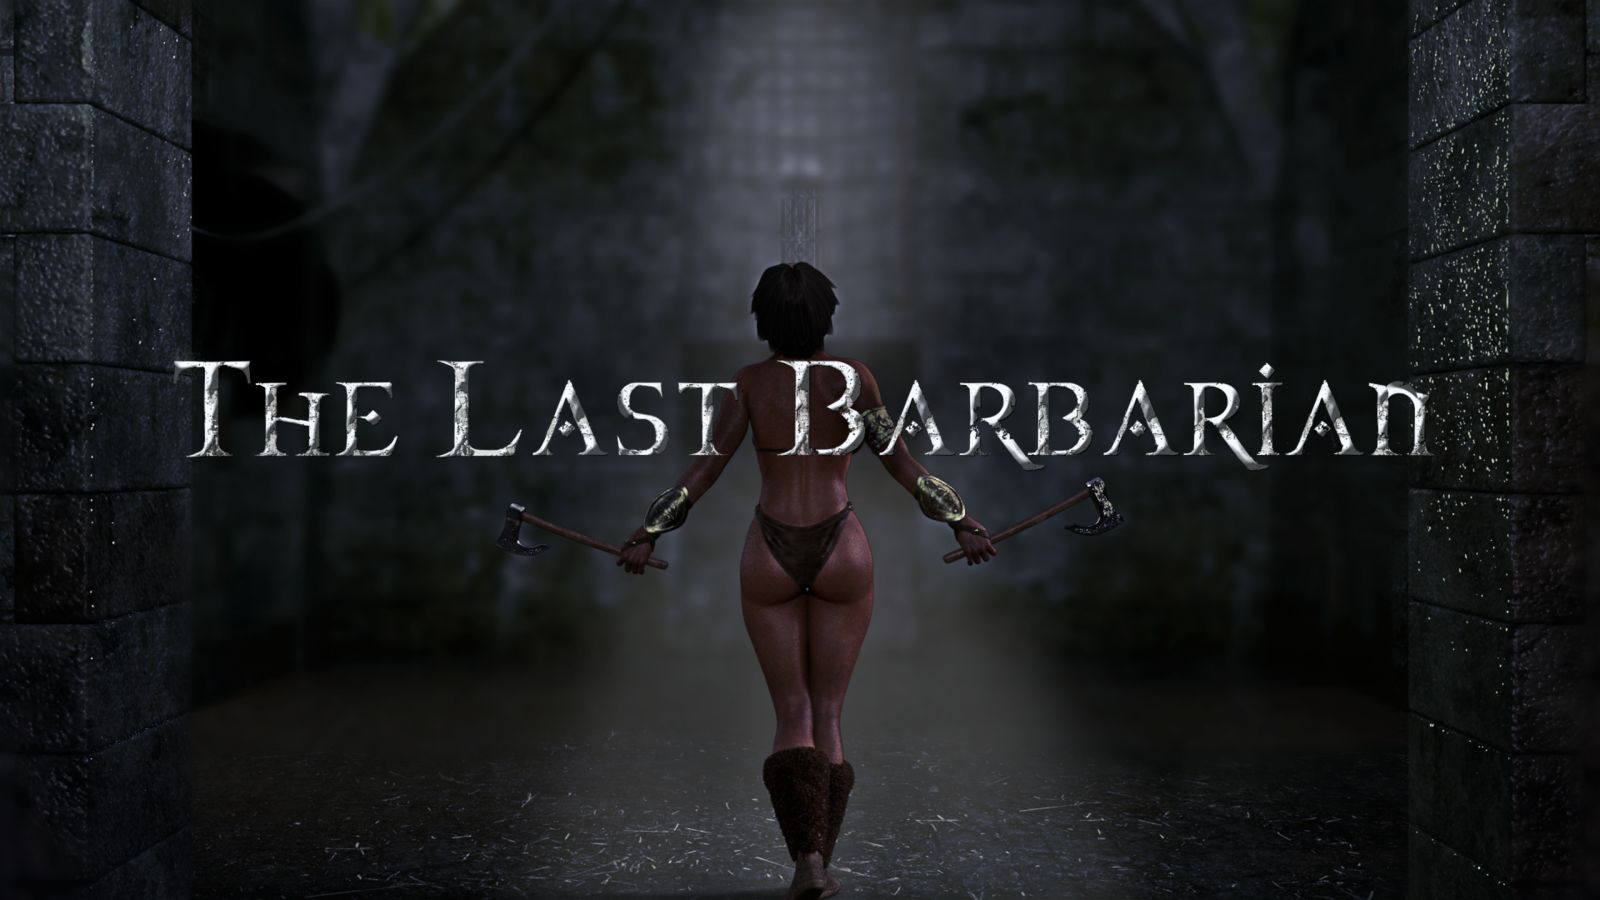 Unity] The Last Barbarian - v0.9.27 by Viktor Black 18+ Adult xxx Porn Game  Download